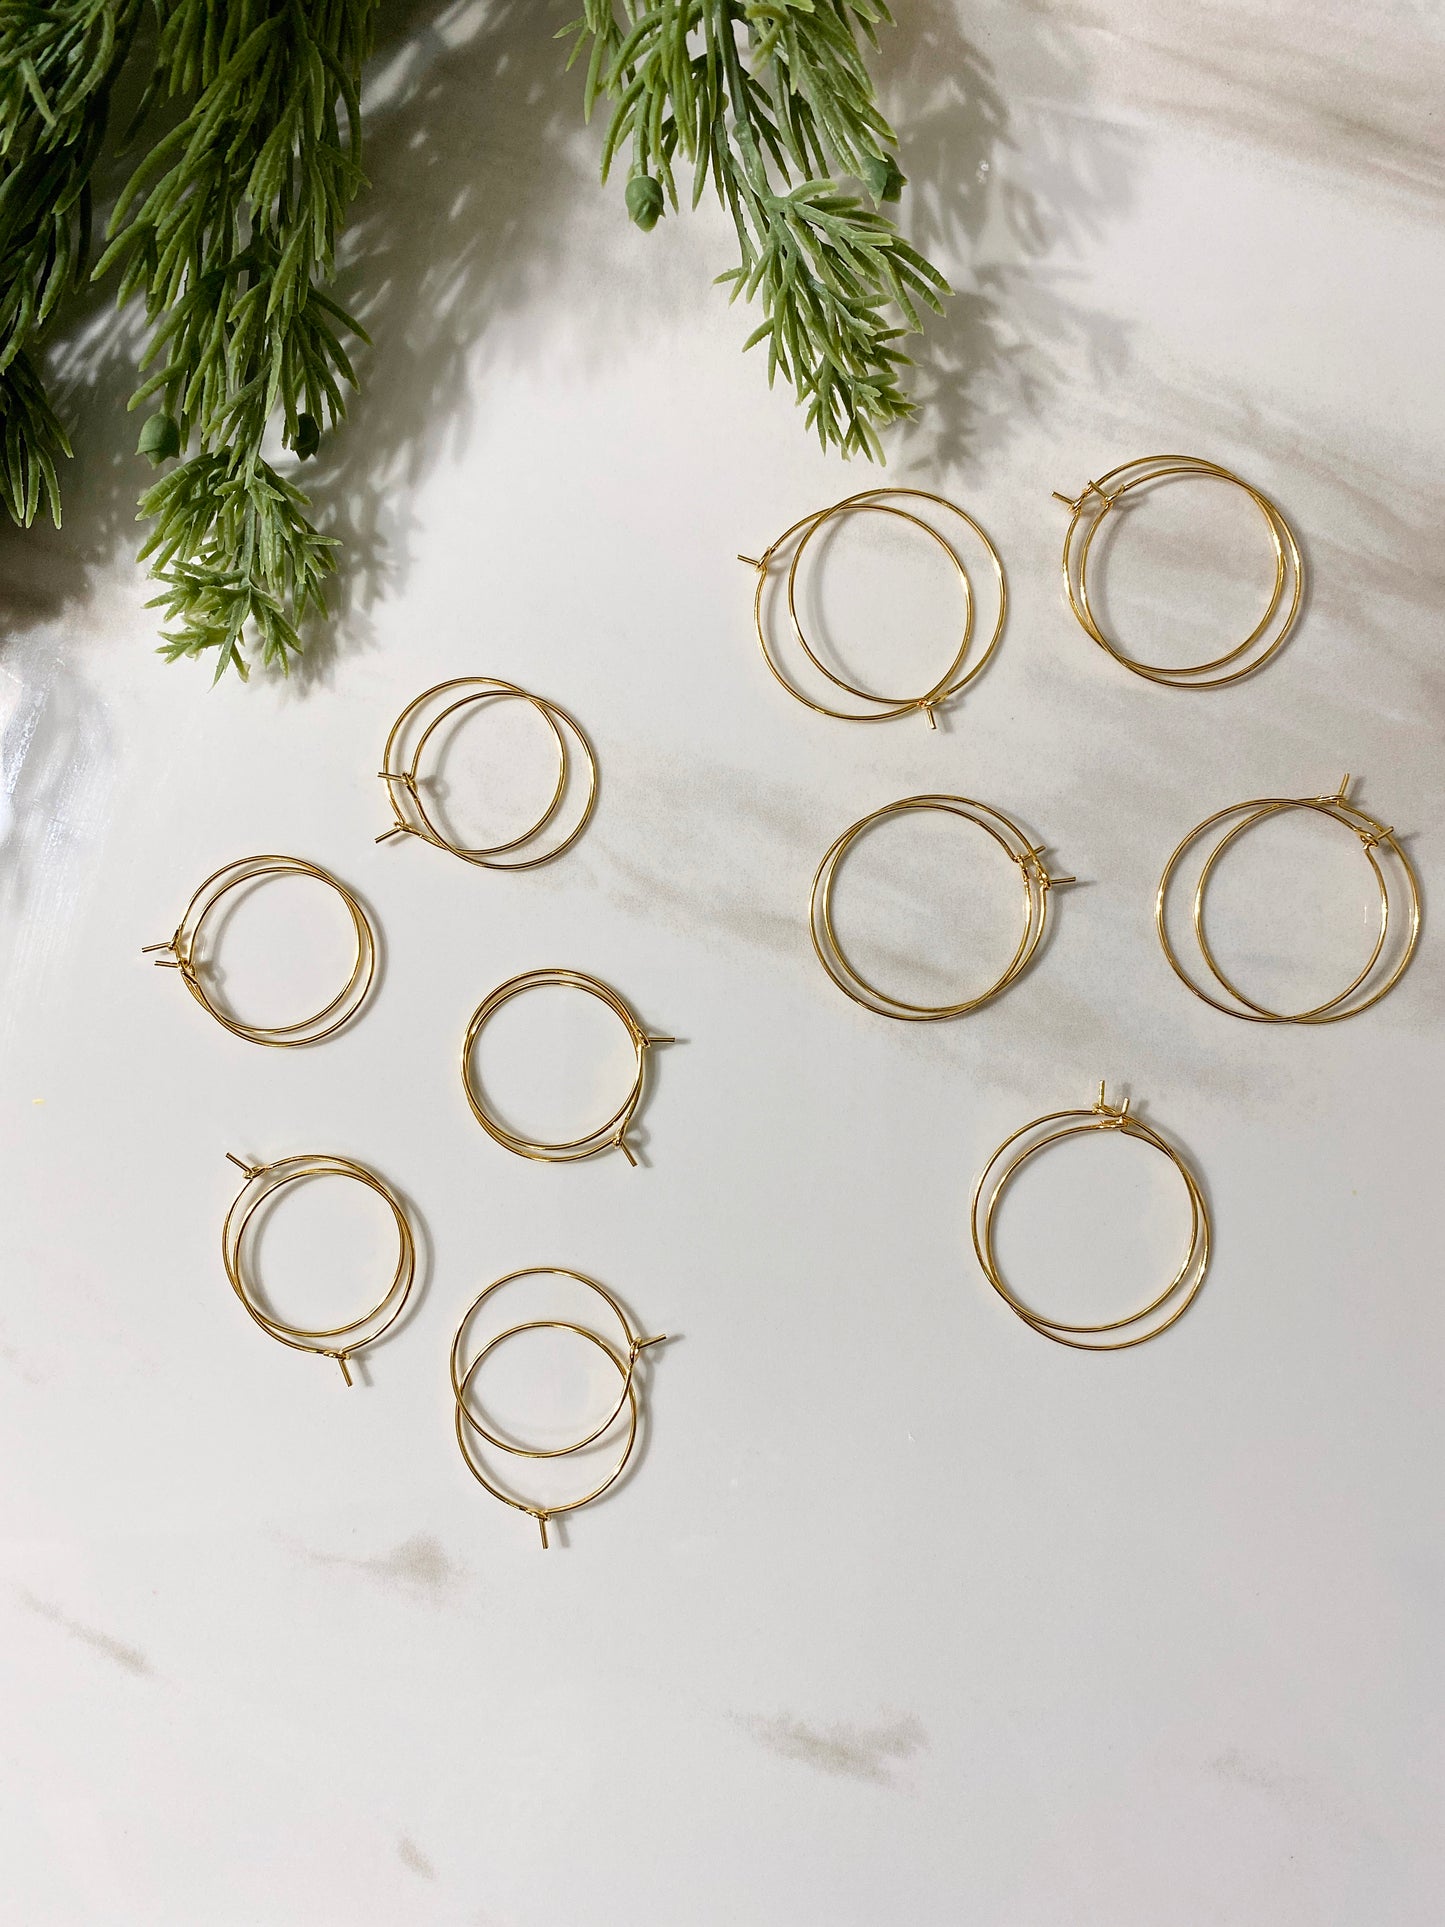 Real Gold Plated Hoops (10 PCS) - Jewelry Findings